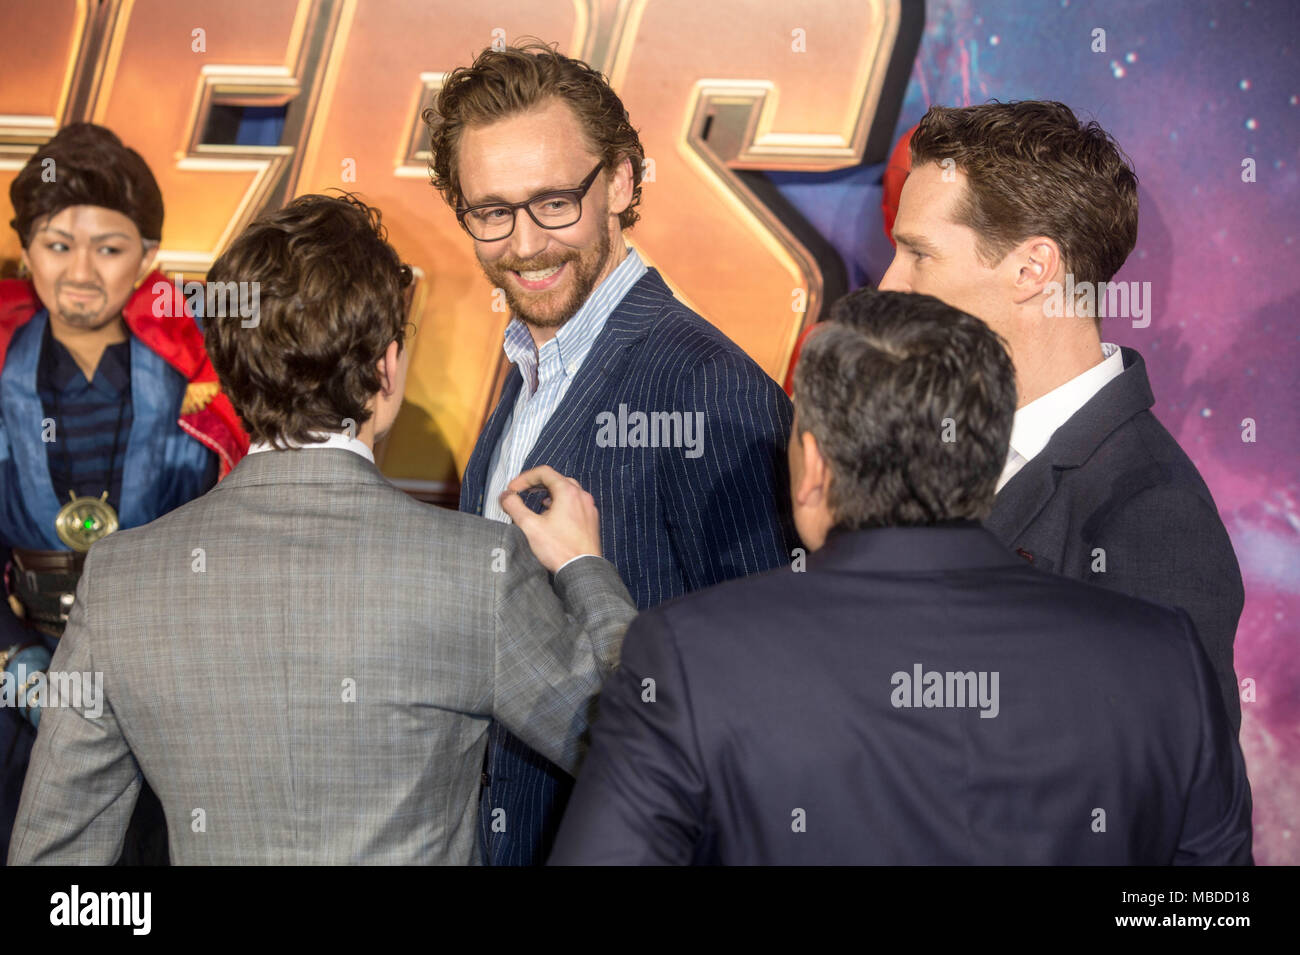 Photo Must Be Credited ©Alpha Press 080010 08/04/2018 Tom Holland, Tom Hiddleston and Benedict Cumberbatch at the Avengers Infinity War UK Fan Event held at Television Studios in White City, London Stock Photo